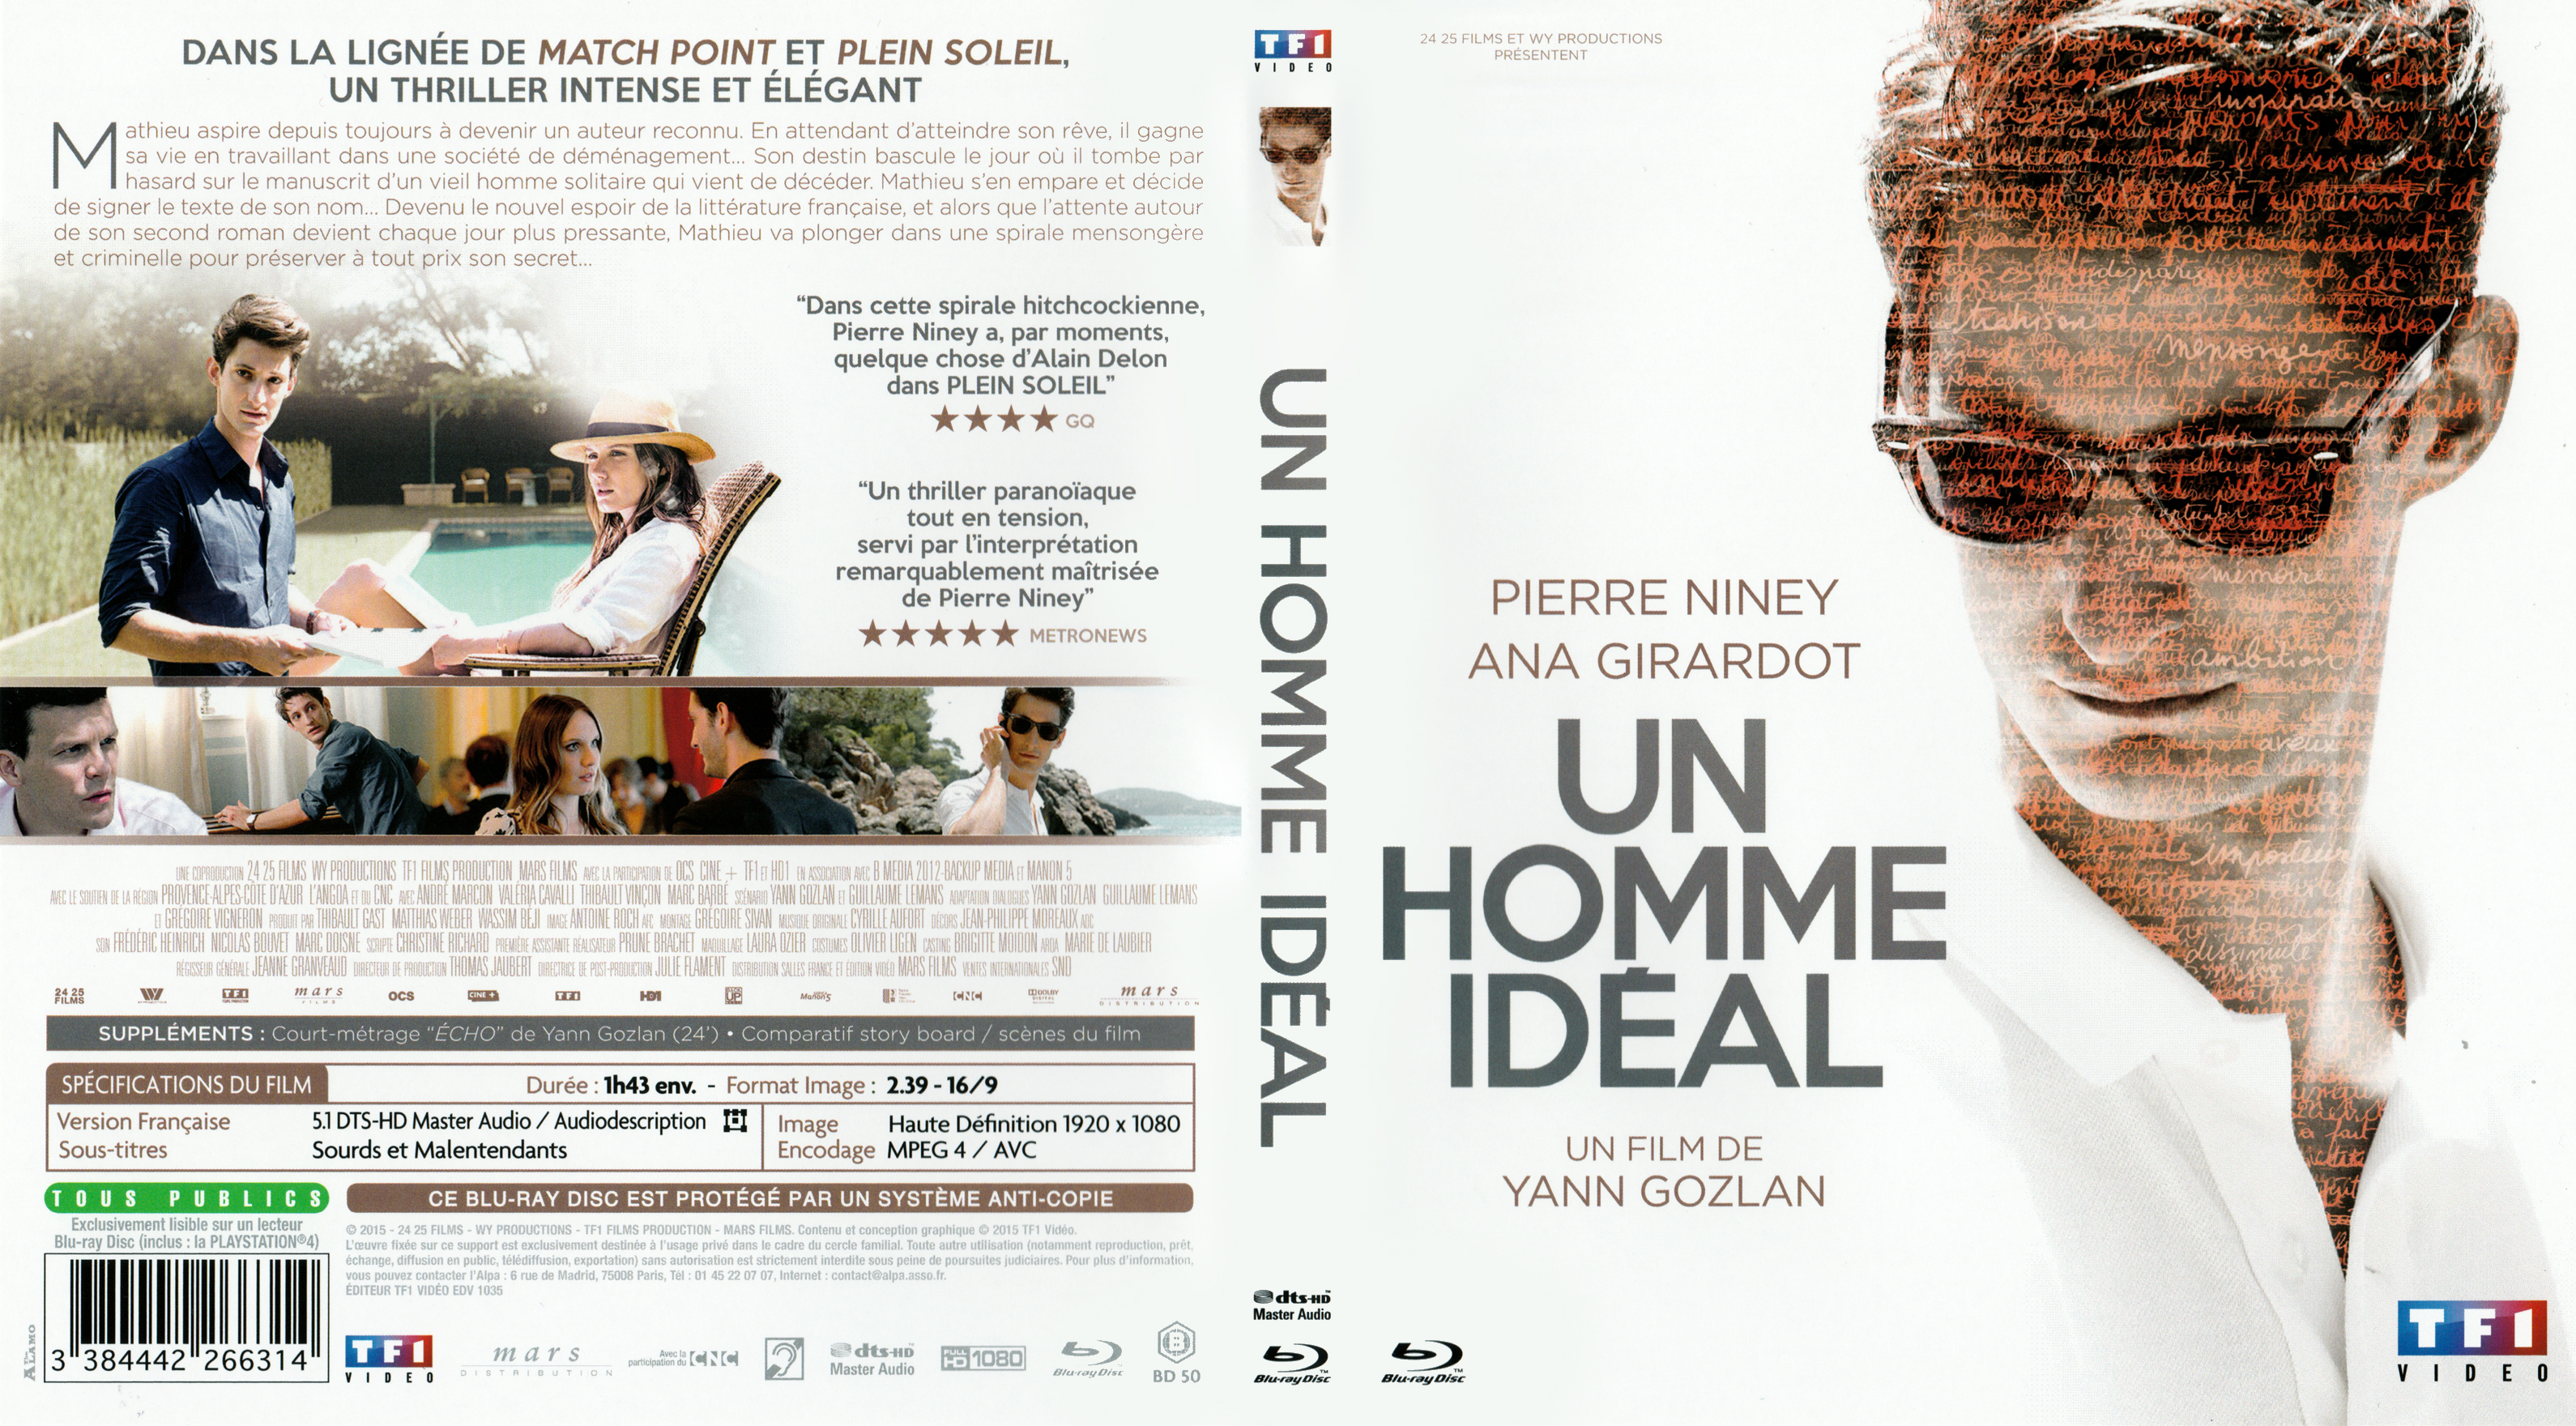 Jaquette DVD Un homme ideal (BLU-RAY)